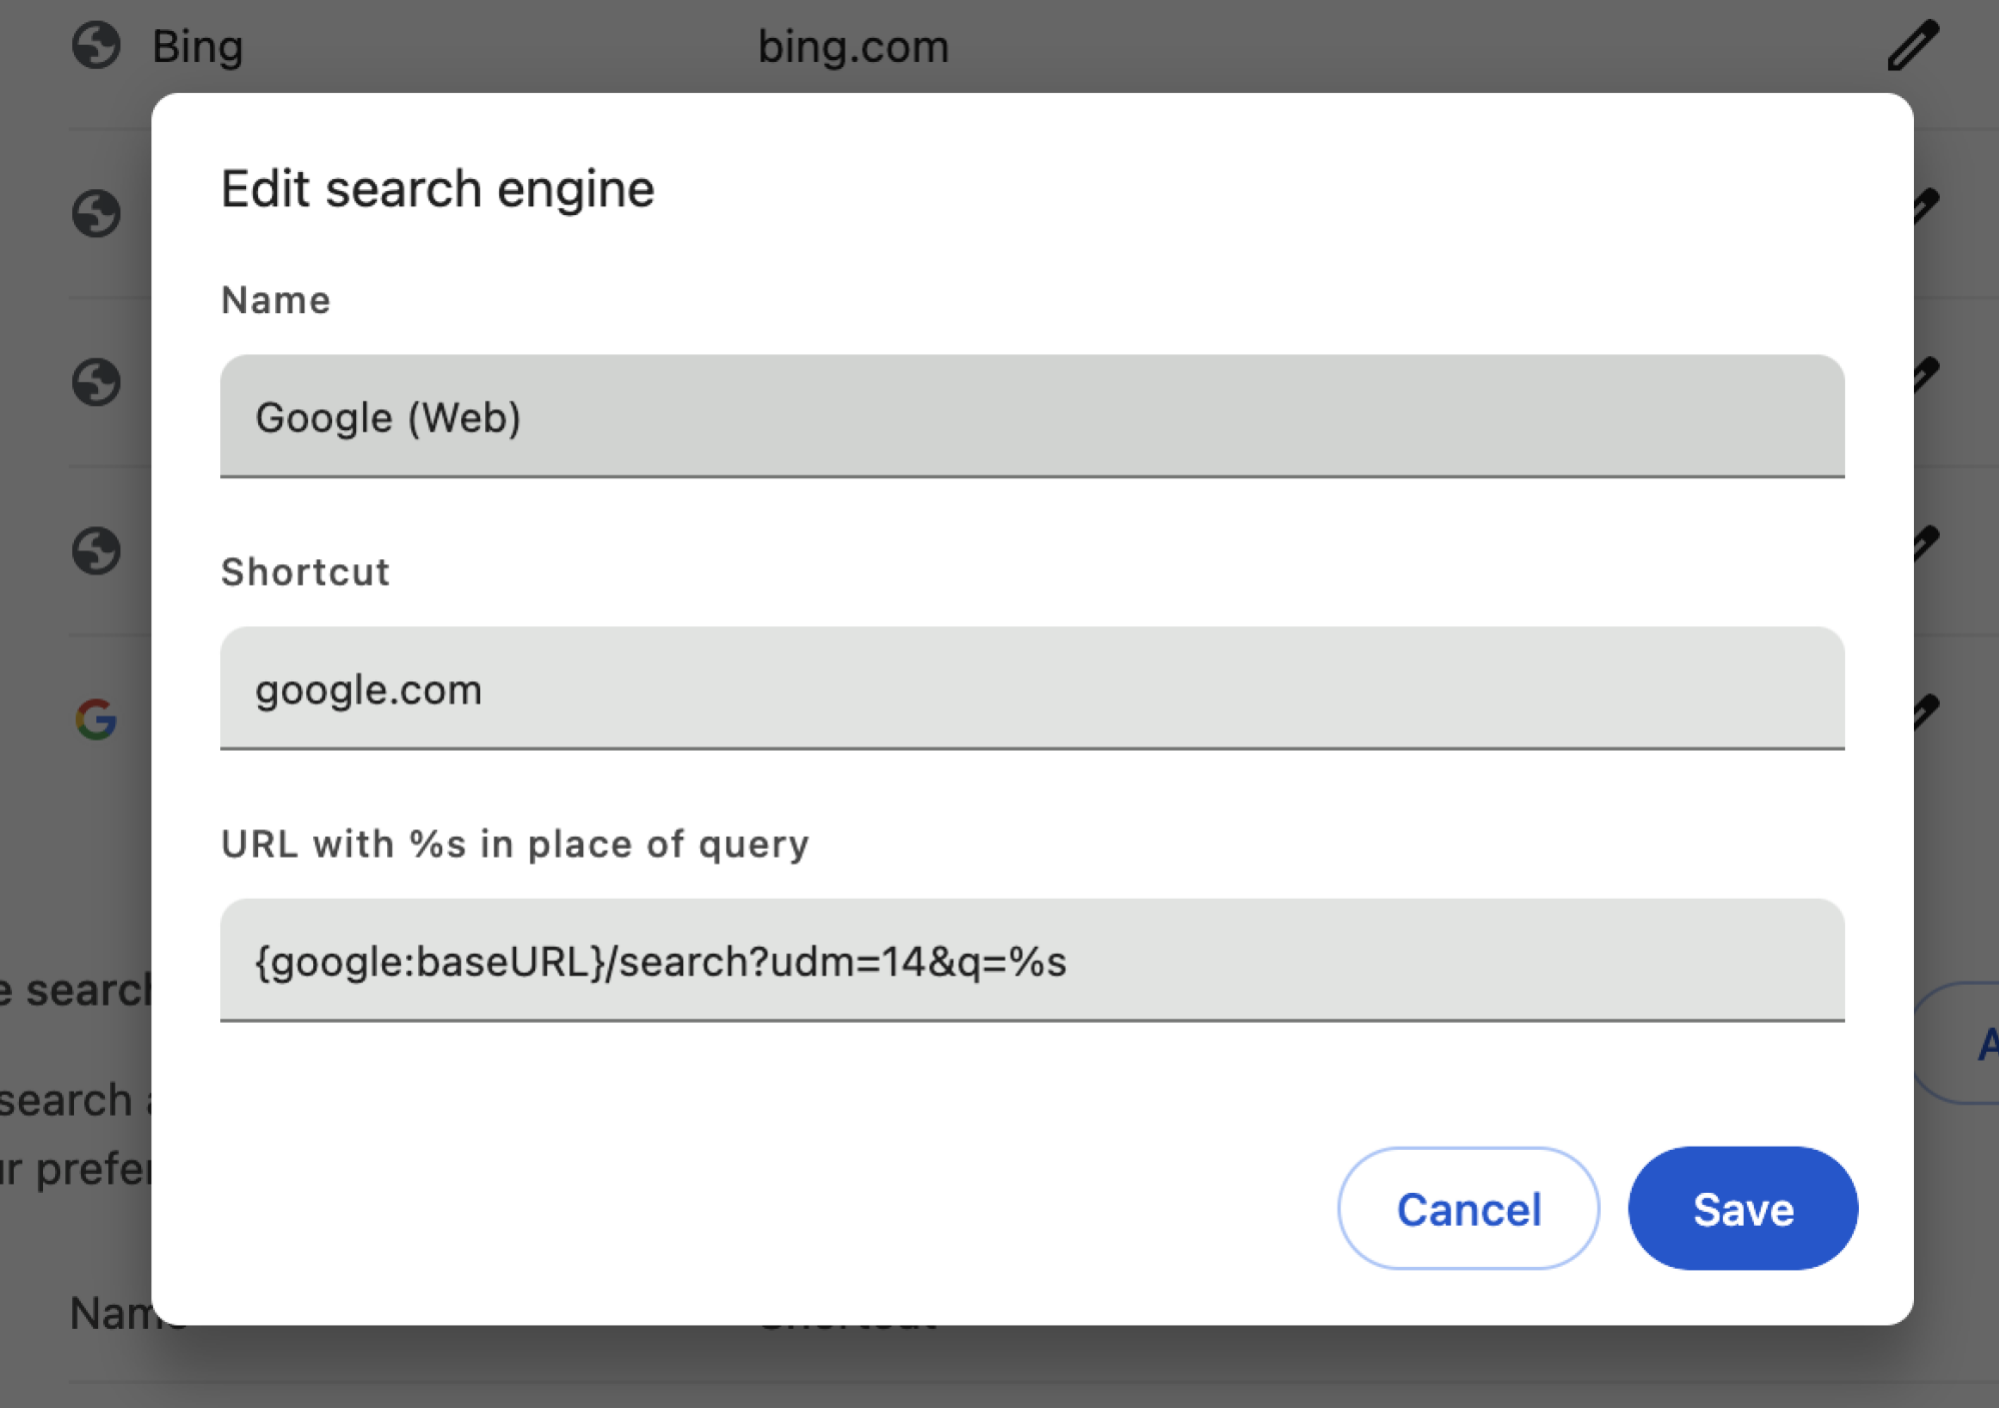 The text "{google:baseURL}/search?udm=14&q=%s" being added to the Settings box